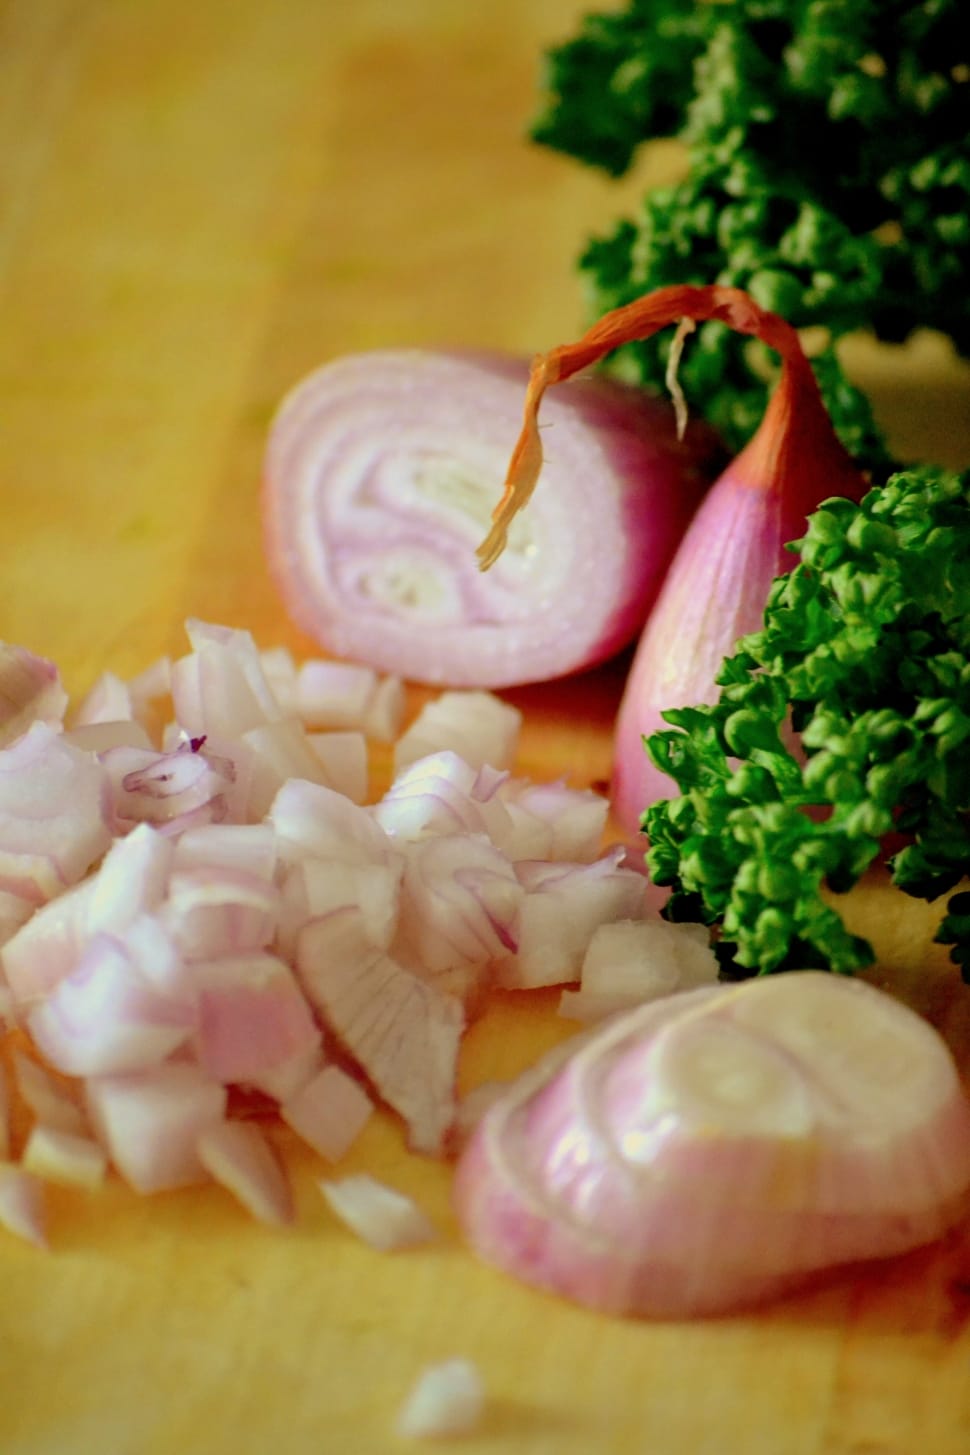 Onions, Raw, Parsley, Healthy, Nutrition, food and drink, food preview